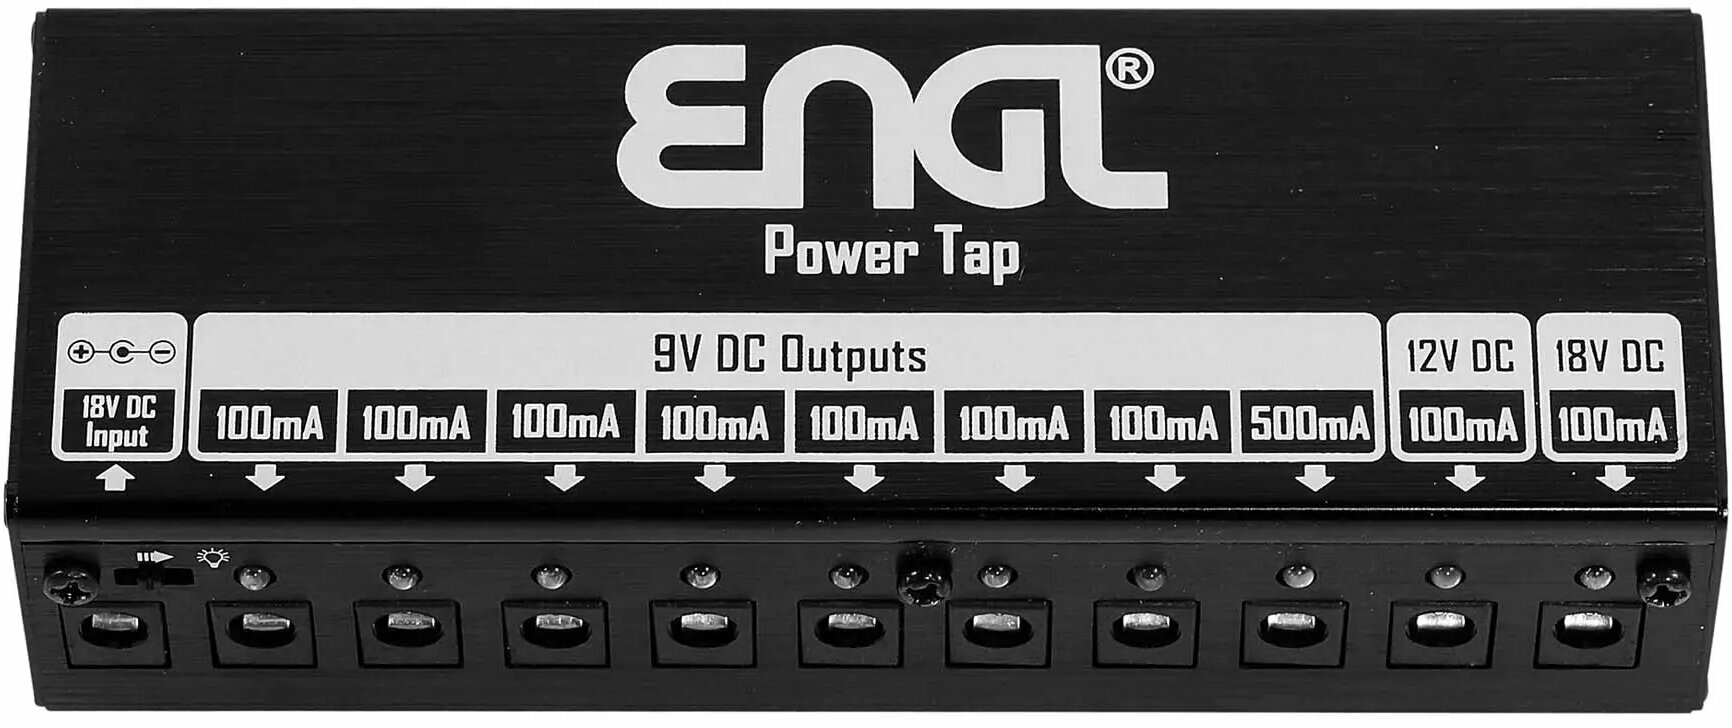 Adapter Engl Engl Power Tap